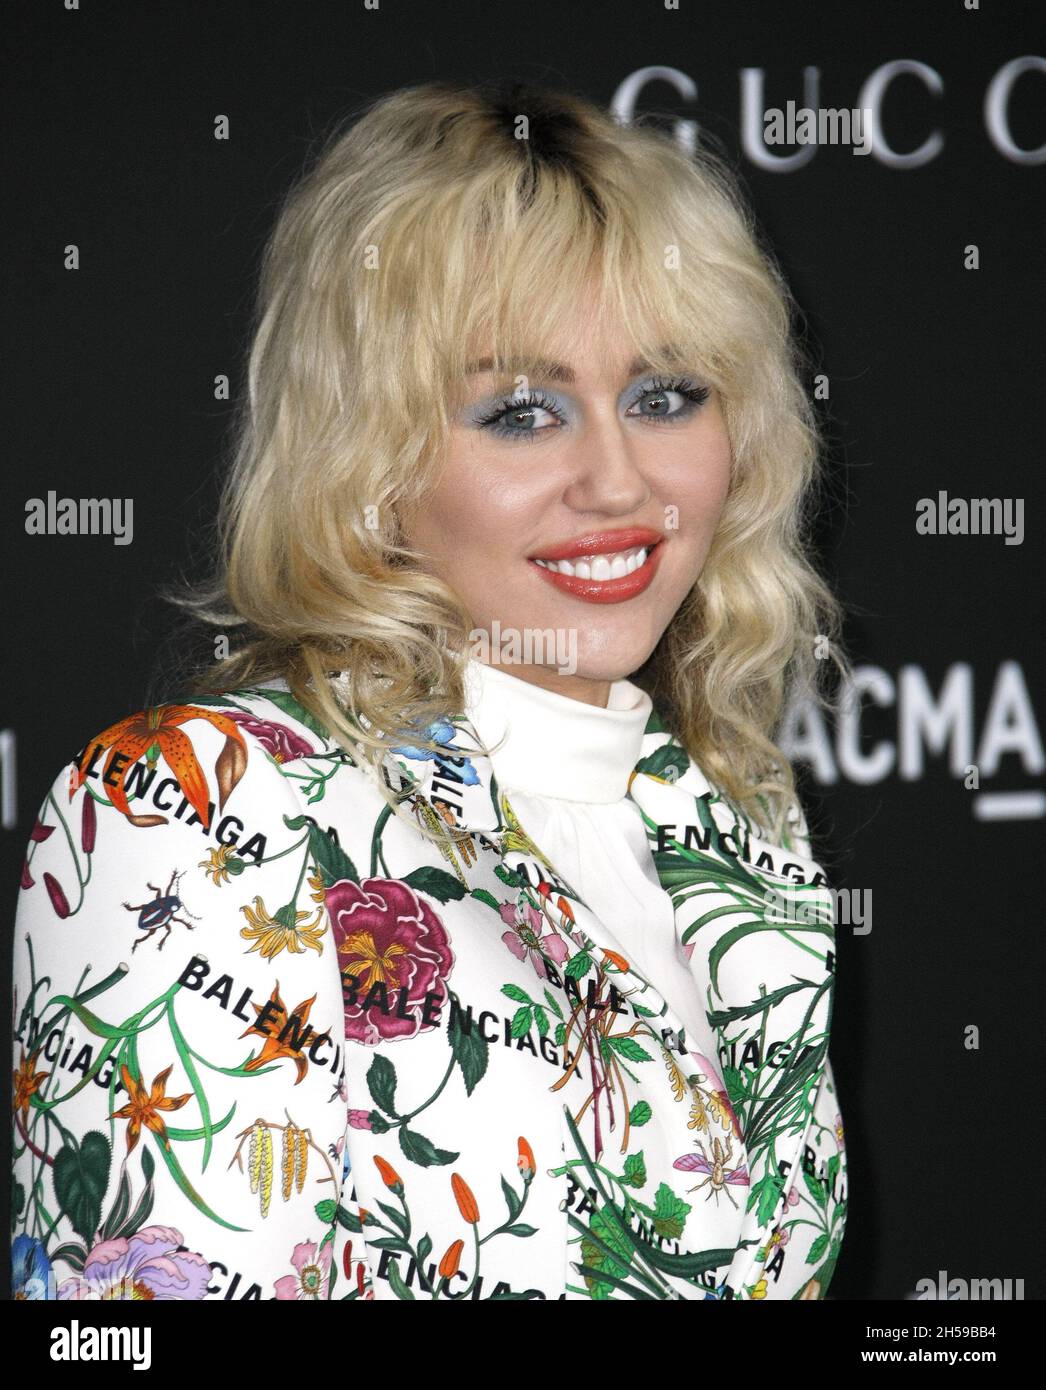 LOS ANGELES, CALIFORNIA - NOVEMBER 06: Miley Cyrus attends the 10th Annual LACMA ART FILM GALA presented by Gucci at Los Angeles County Museum of Art on November 06, 2021 in Los Angeles, California. Photo: CraSH/imageSPACE/MediaPunch Stock Photo